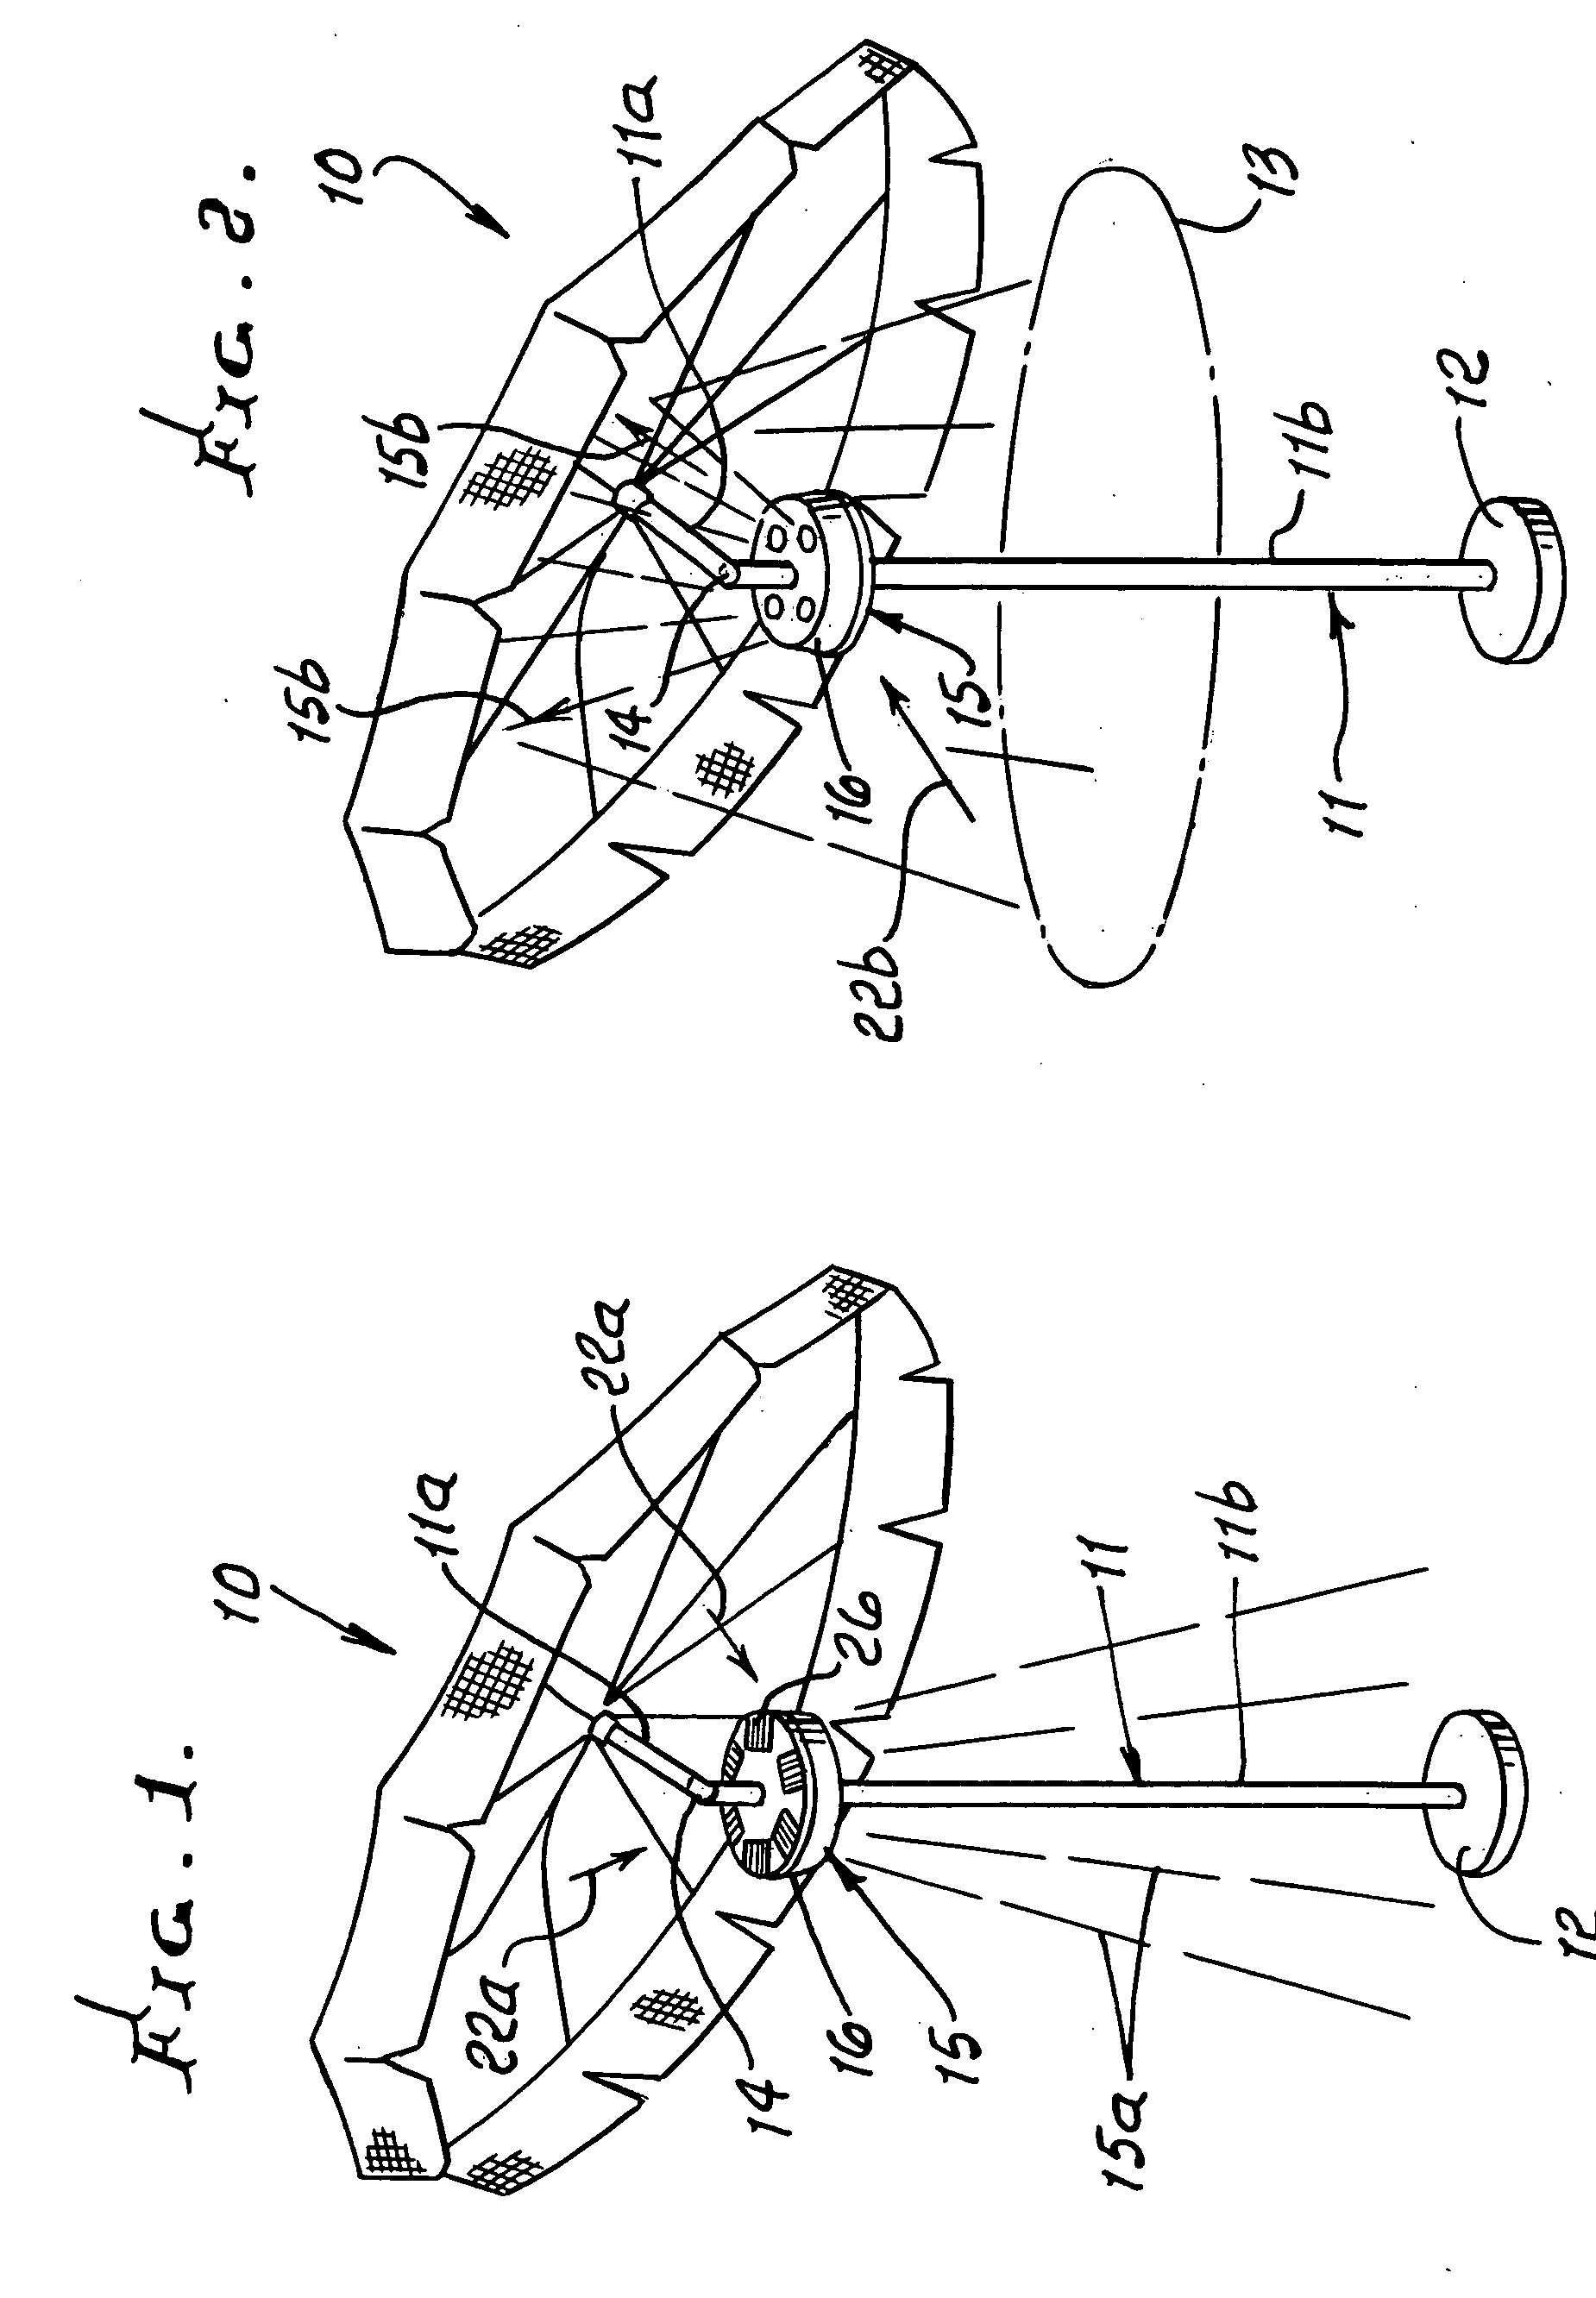 Light providing apparatus attachable to umbrella and stand assembly